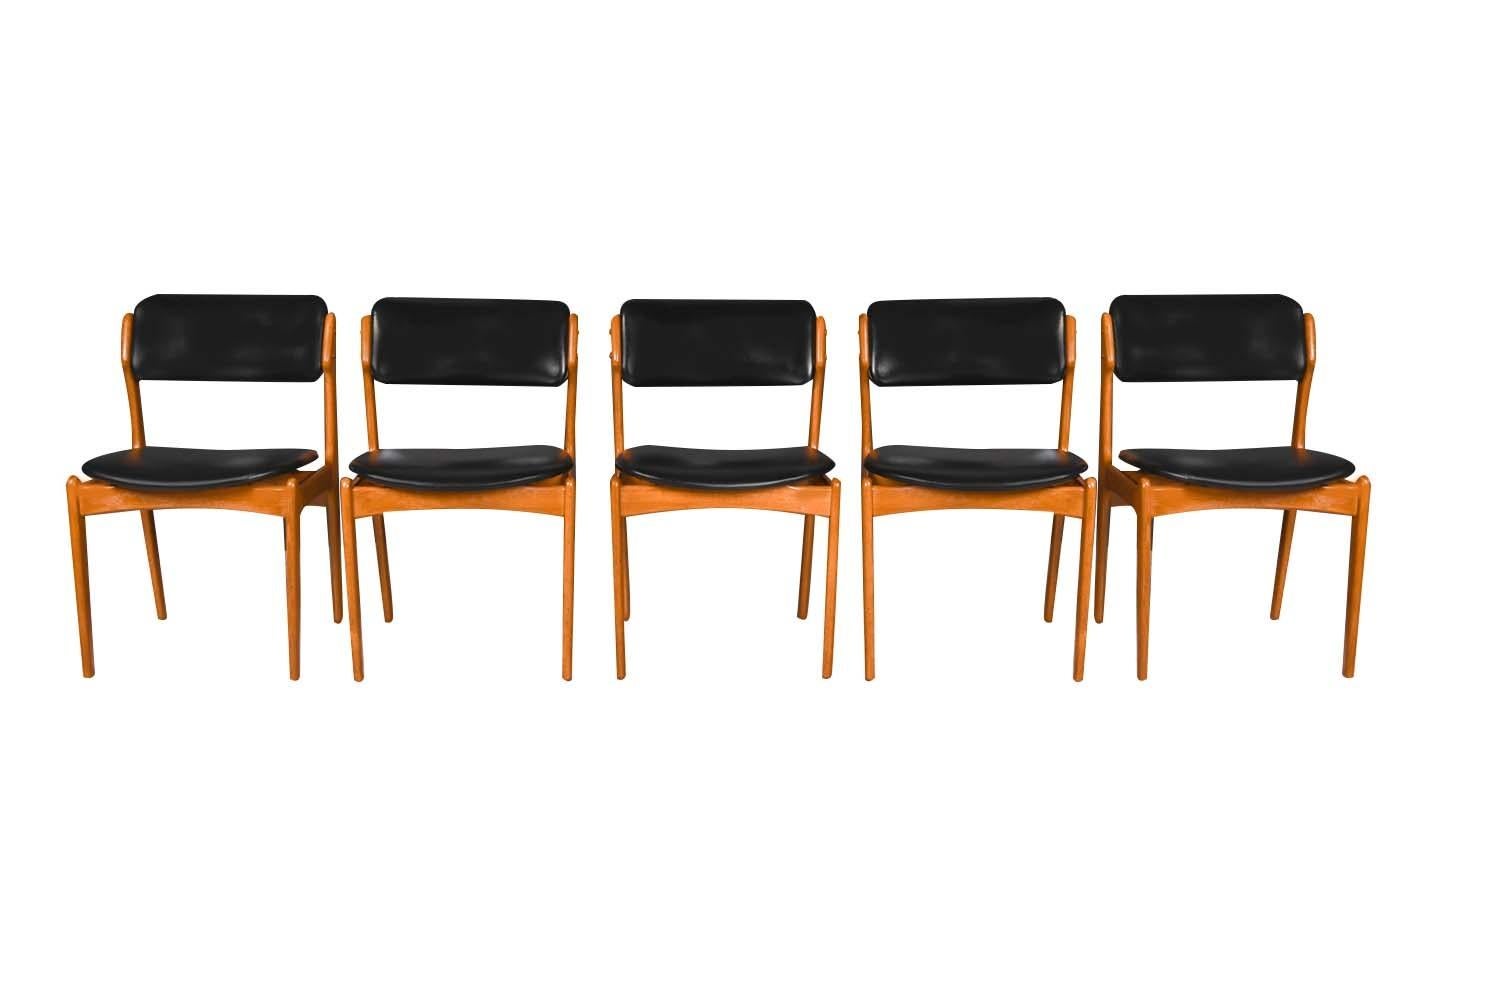 An outstanding set of five beautiful Midcentury model #49 teak dining chairs by Scandinavian designer Erik Buch for O.D. Mobler AS, circa 1960s. Buch’s organic and functional aesthetic are showcased in these beautifully crafted modern teak dining